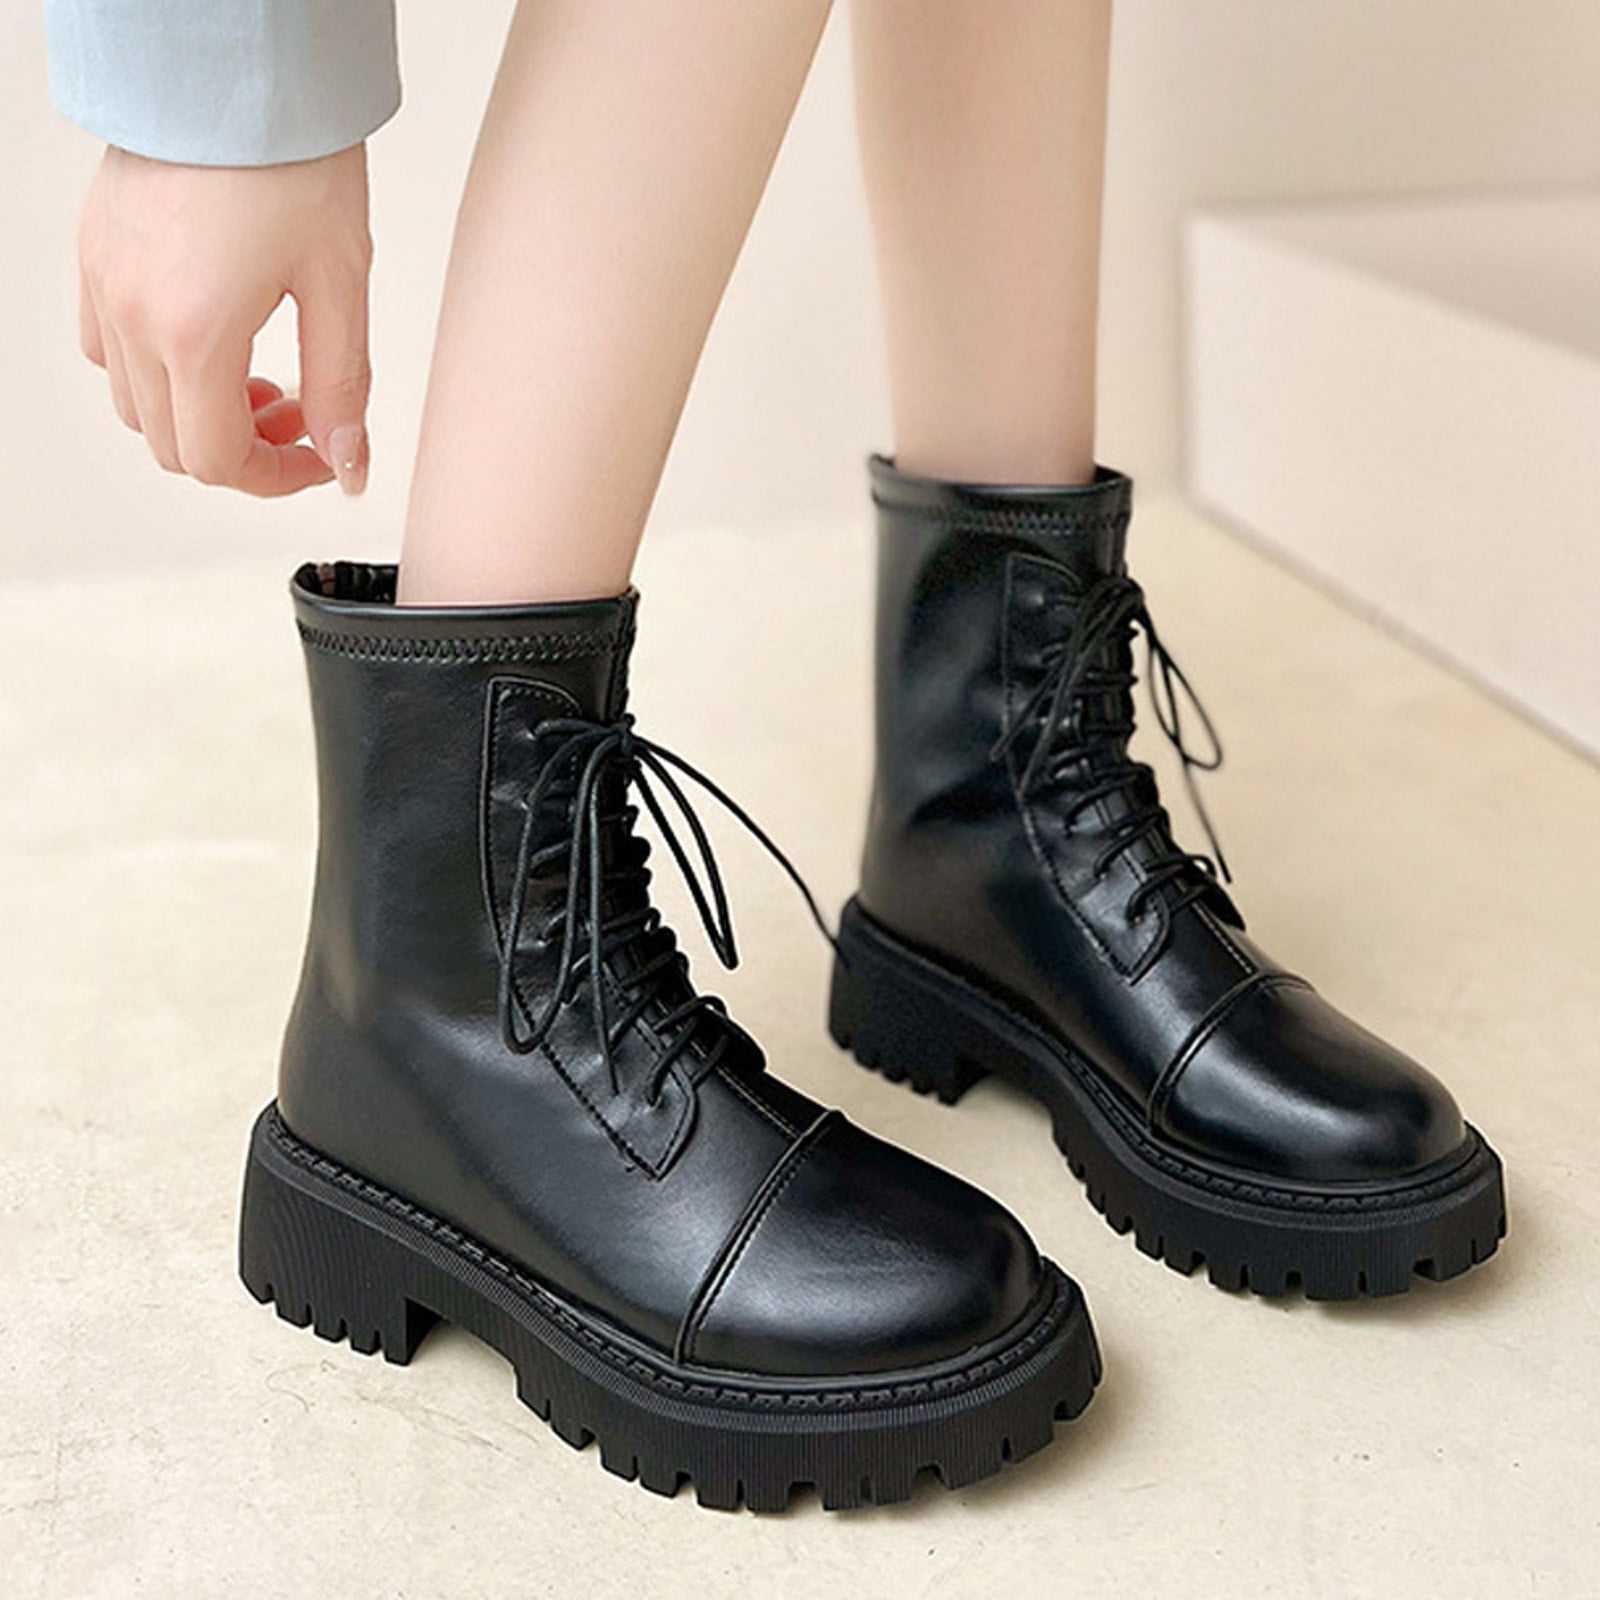 Cathalem Boots Women 8 Fashion Women's Shoes British Style Leather Lace Up  Back Zipper Solid Casual Boots Lace up Boots for Women Black 6